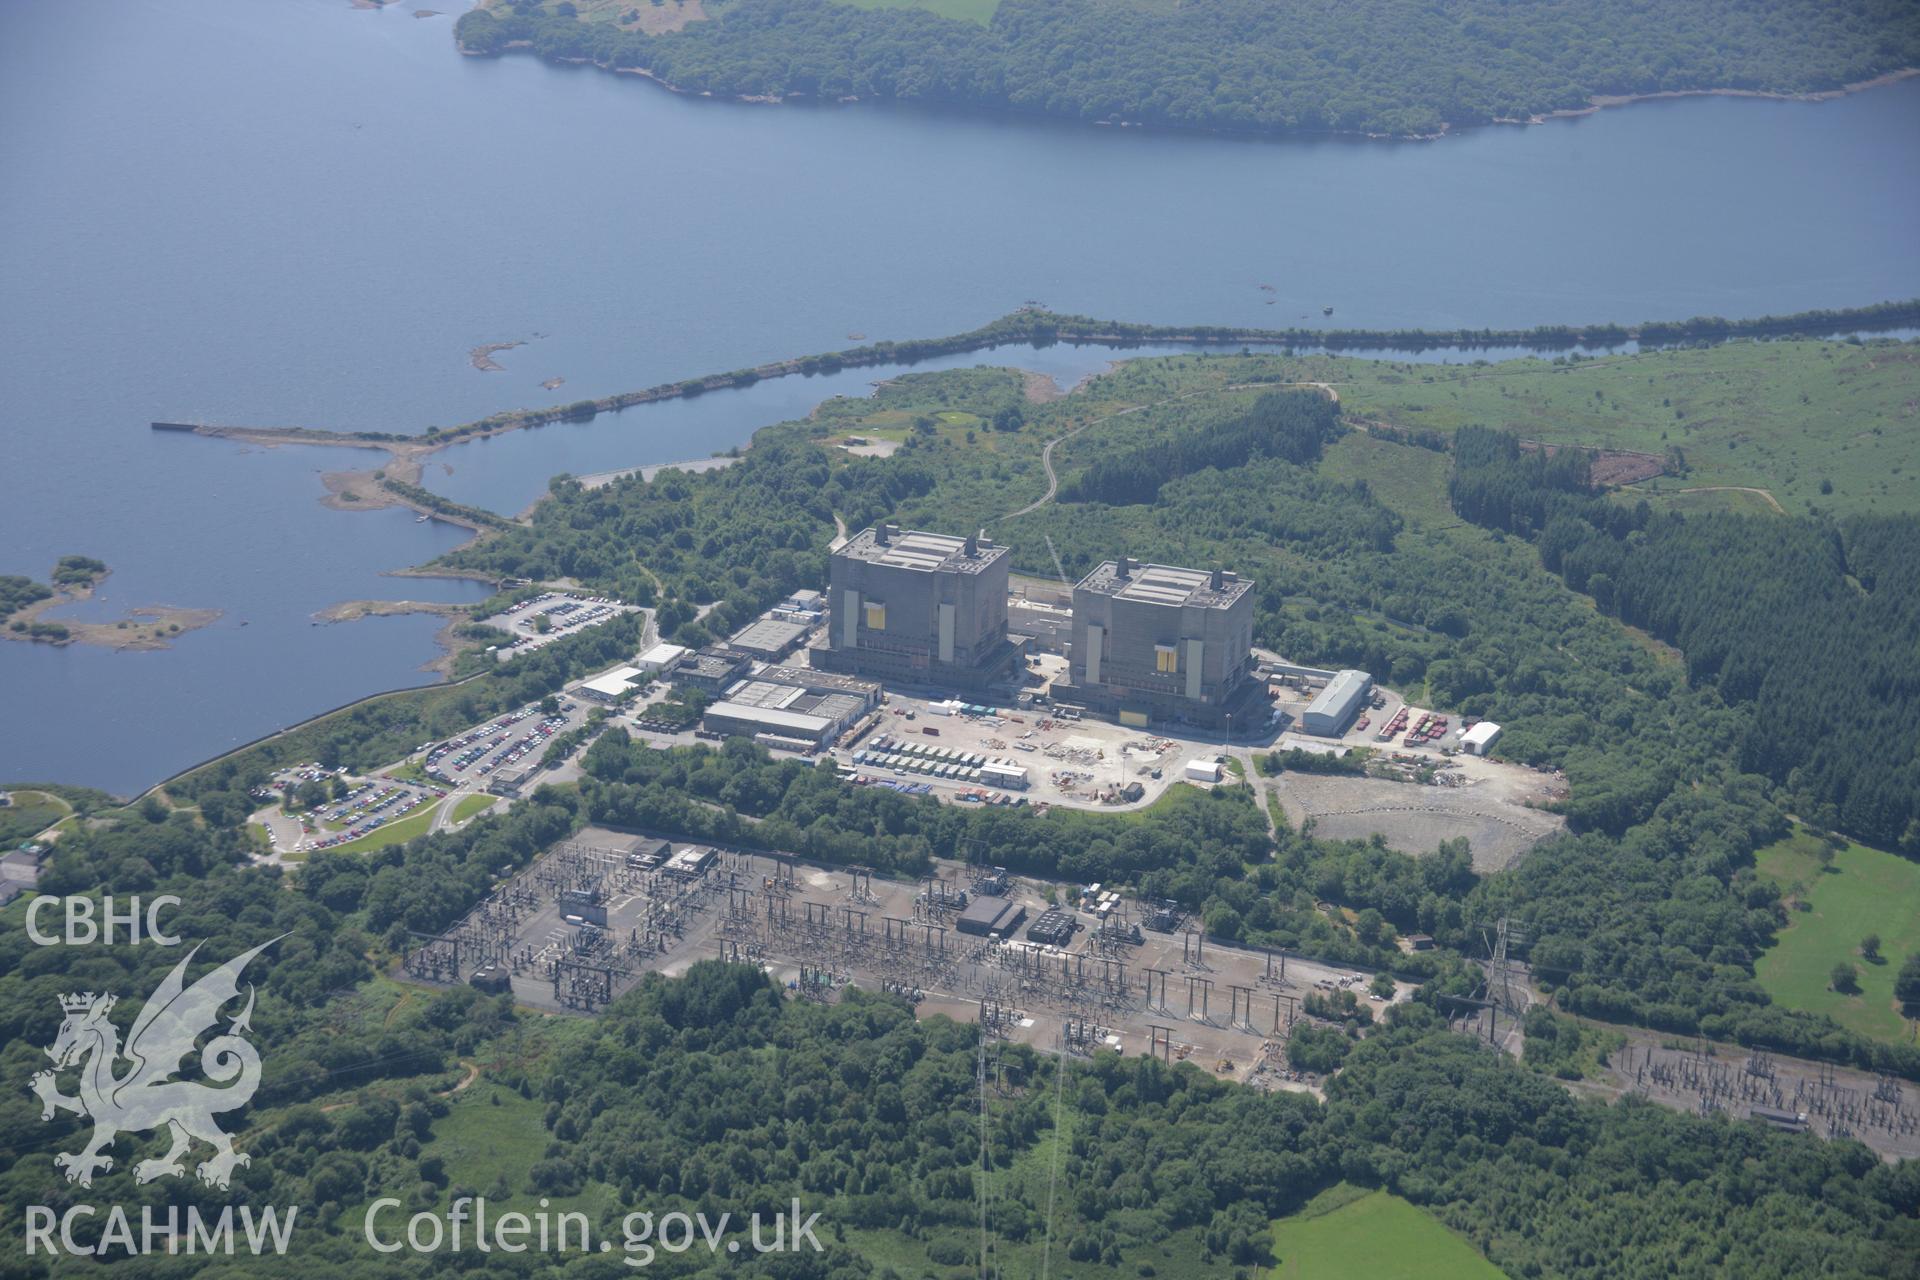 RCAHMW colour oblique aerial photograph of Trawsfynydd Power Station, Gellilydan. Taken on 18 July 2006 by Toby Driver.